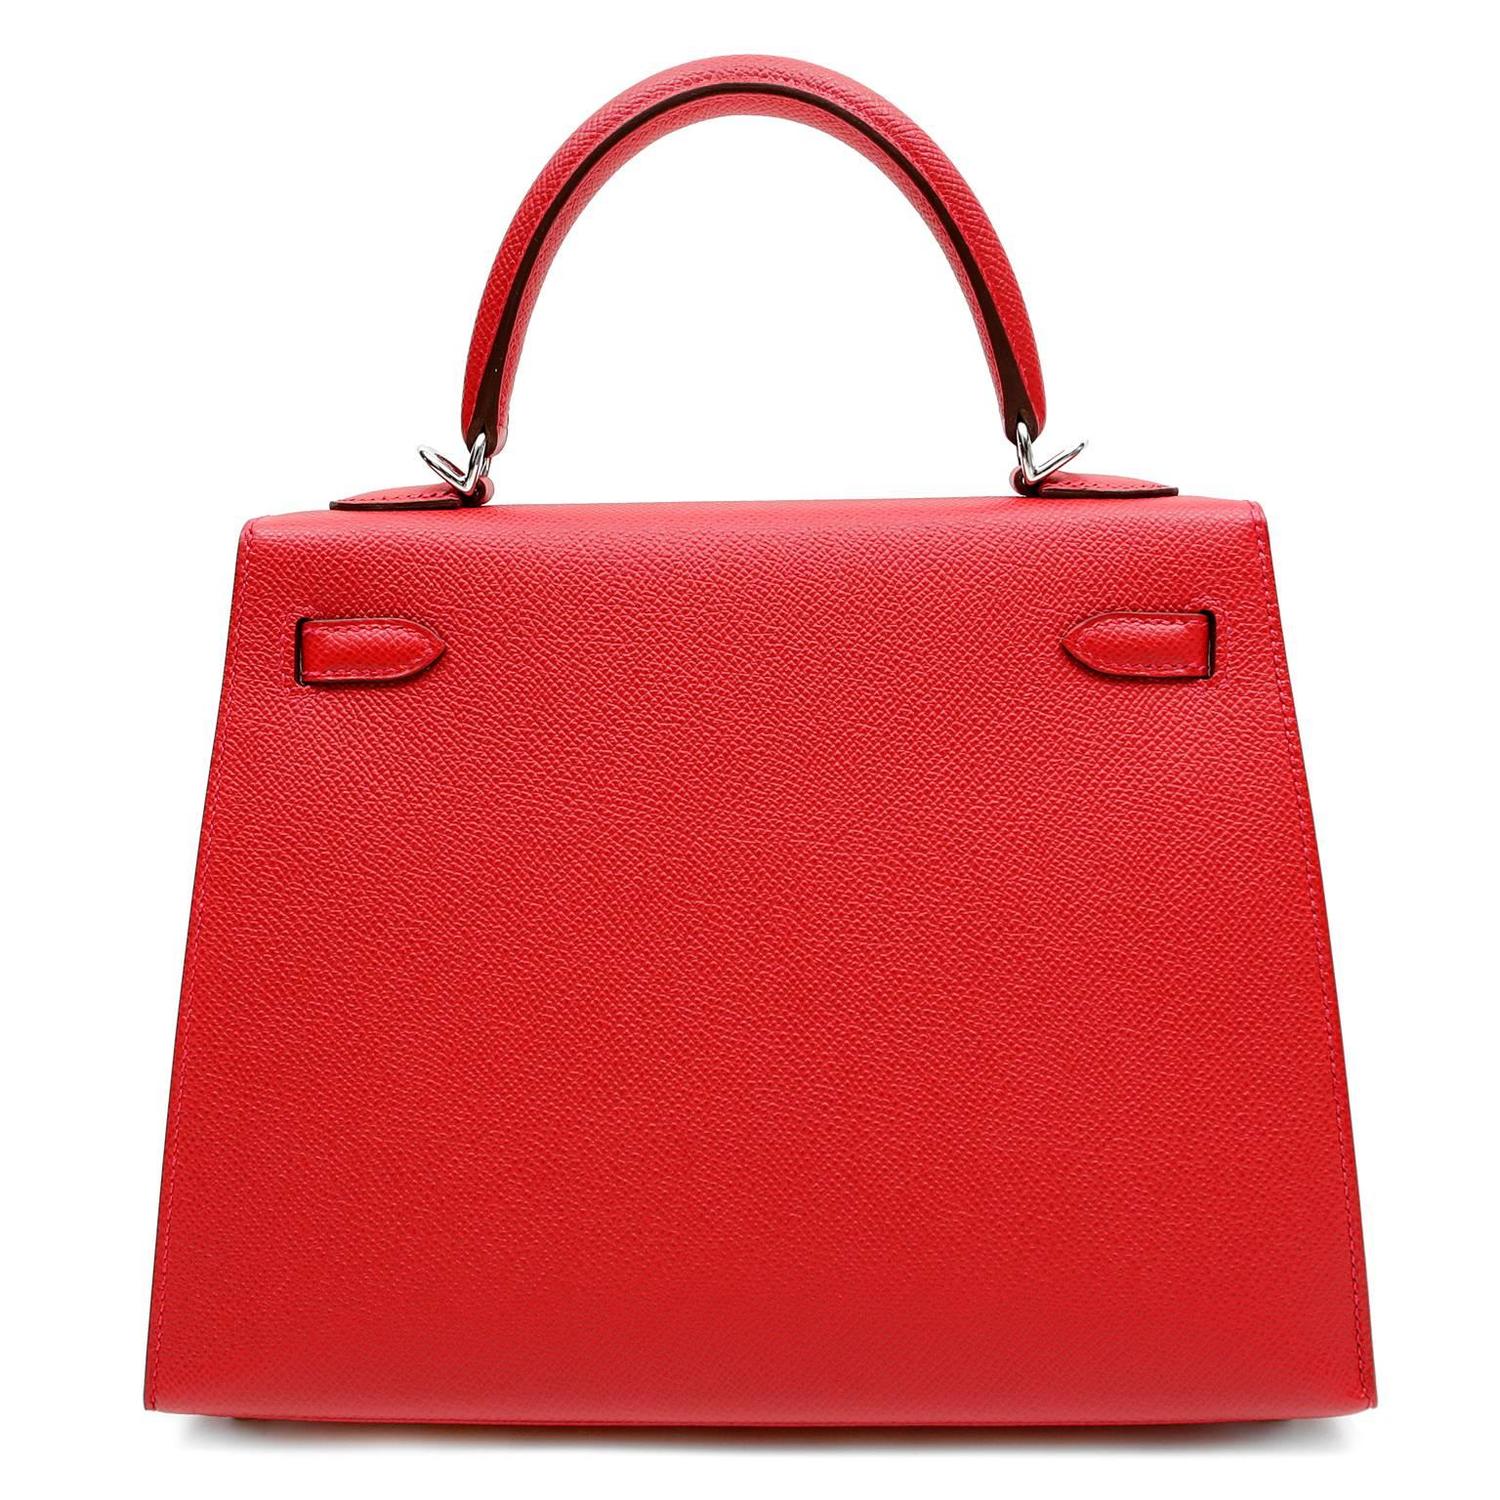 Rouge Mallorca - The famous Hermès Kelly bag adds elegance and glamour to  every outfit.⁠♥️⁠ Find an exclusive selection at Rouge Mallorca⁠ ⁠ ⁠ ⁠ ⁠ ⁠  ⁠ #finestquality #luxurygoods #pristinecondi